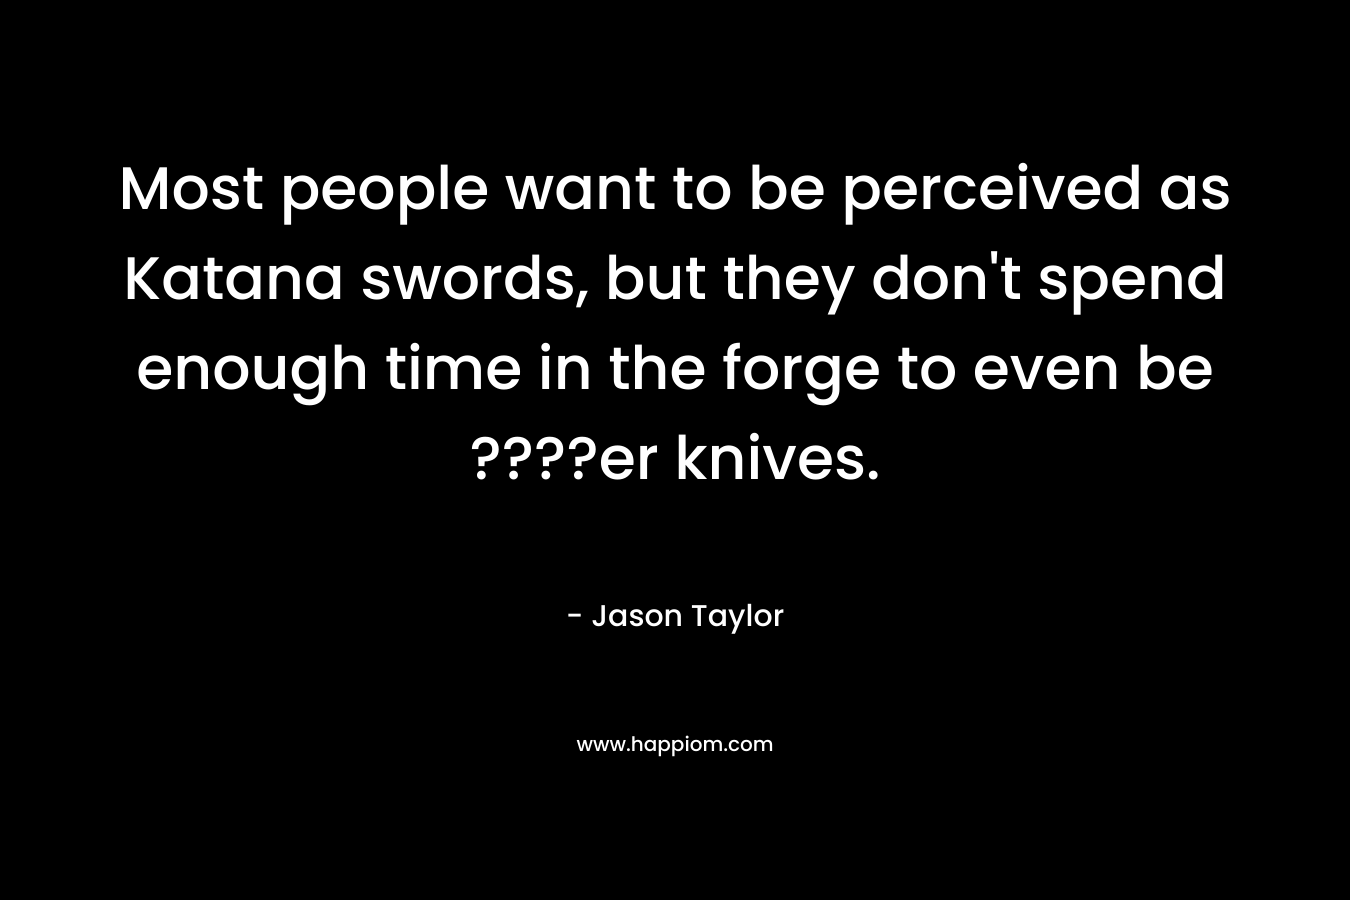 Most people want to be perceived as Katana swords, but they don't spend enough time in the forge to even be ????er knives.